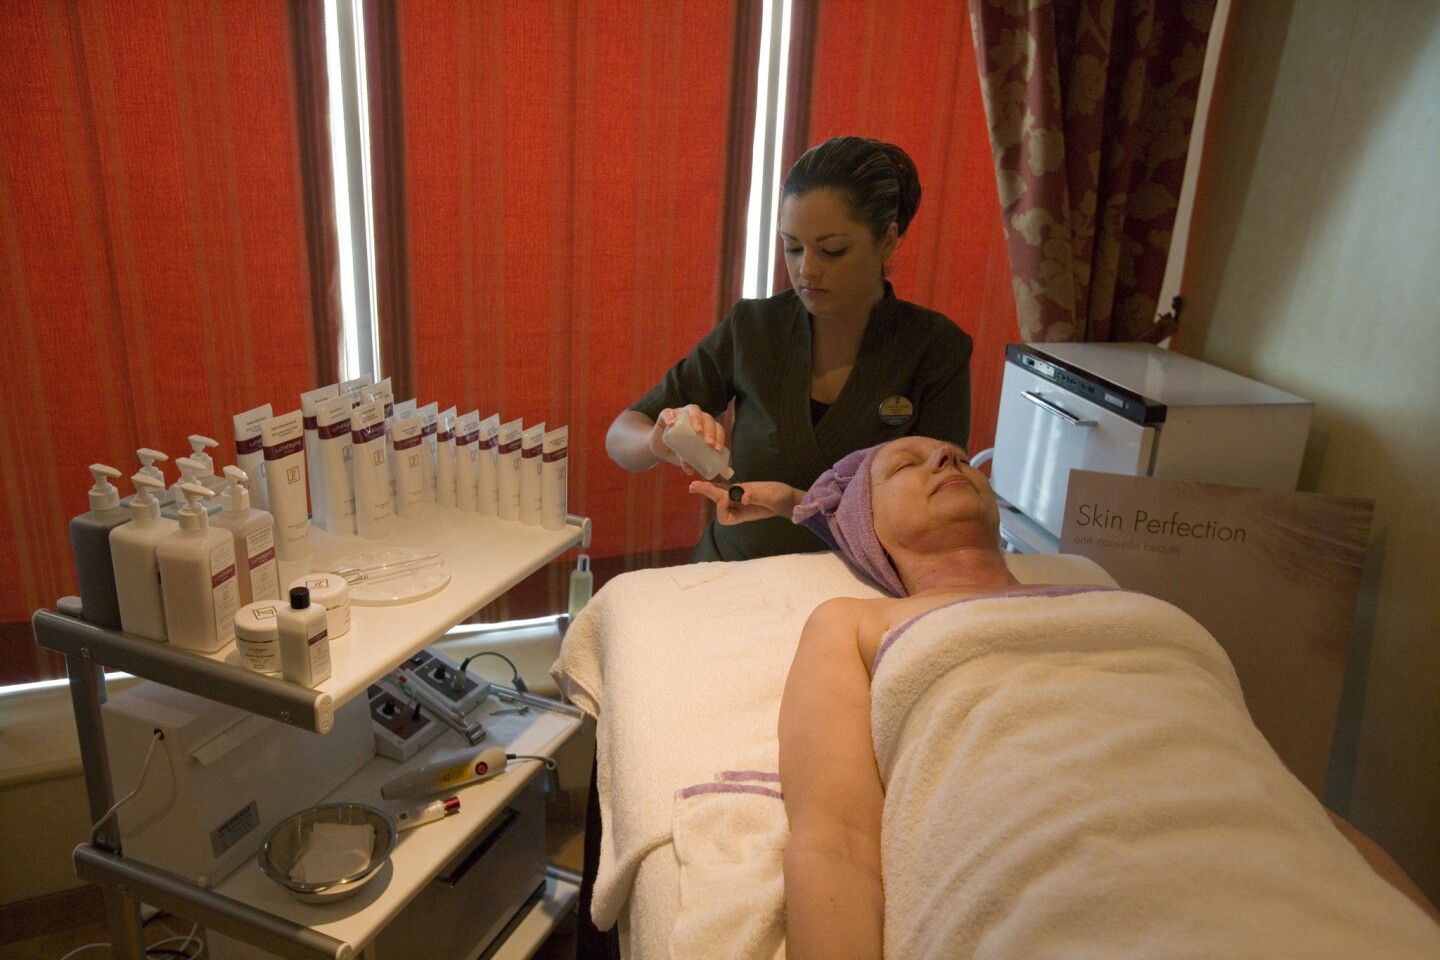 Royal Caribbean's Freedom of the Seas has the Freedom Day Spa on Deck 11, offering such services as stone therapy. On any cruise ship, it's a good idea to book spa services soon after you get onboard -- but check out the facilities first.